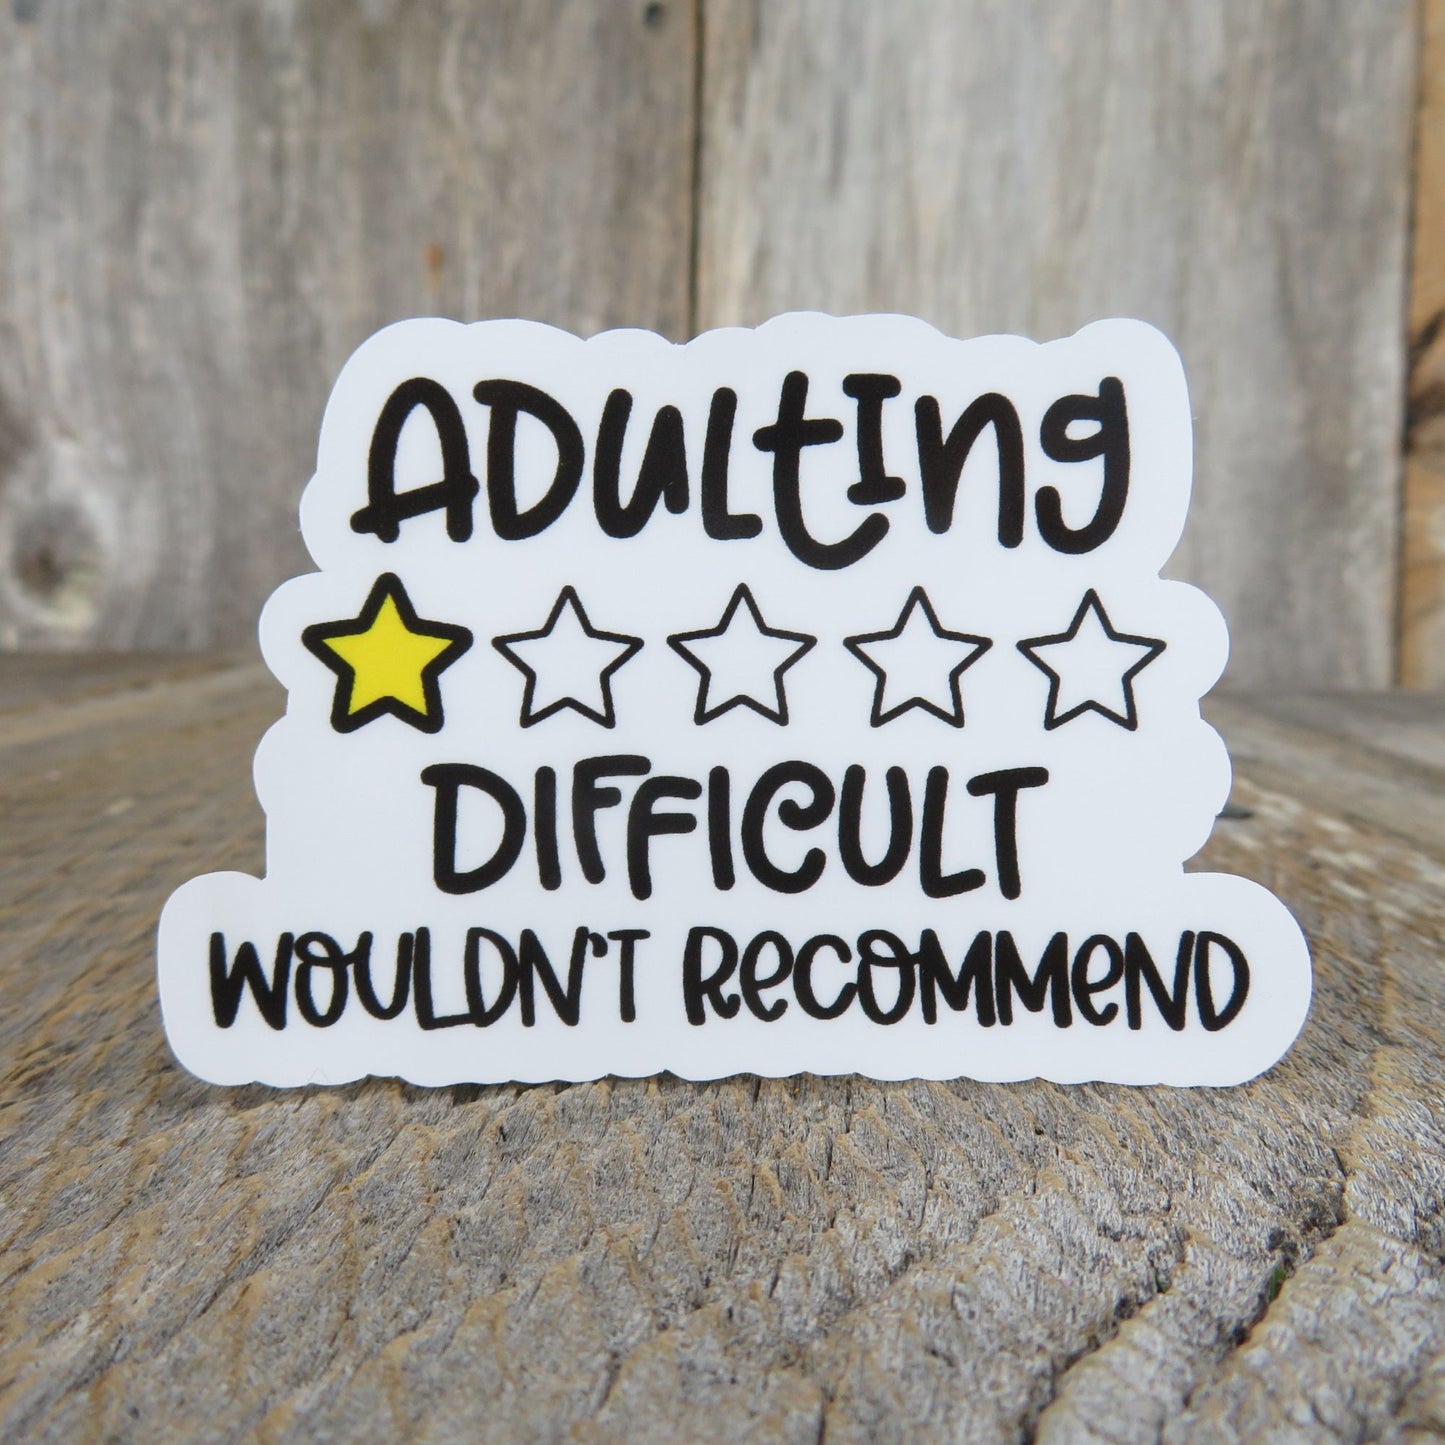 Adulting 1 Star Difficult Wouldn't Recommend Sticker Responsibility Sucks Social Funny Sarcastic